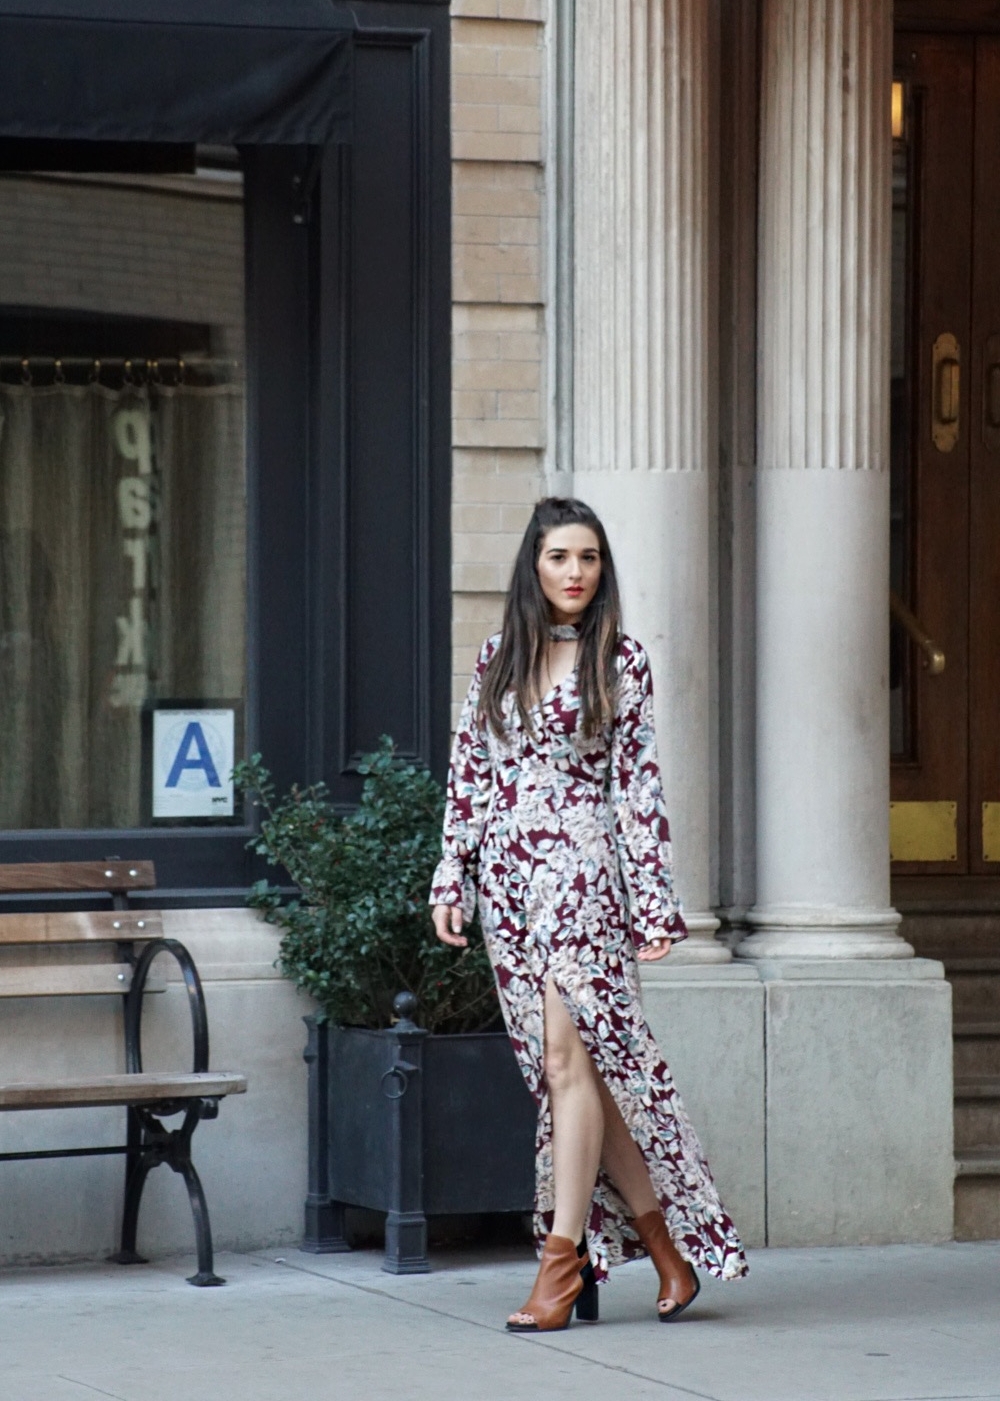 Trescool Floral Dress How To Stay Productive When Working From Home Esther Santer Fashion Blog NYC Street Style Blogger Outfit OOTD Trendy Pretty Spring Beautiful Shoes M4D3 Topknot Braid Wearing Online Shopping Photoshoot Inspiration Inspo Women Girl.JPG